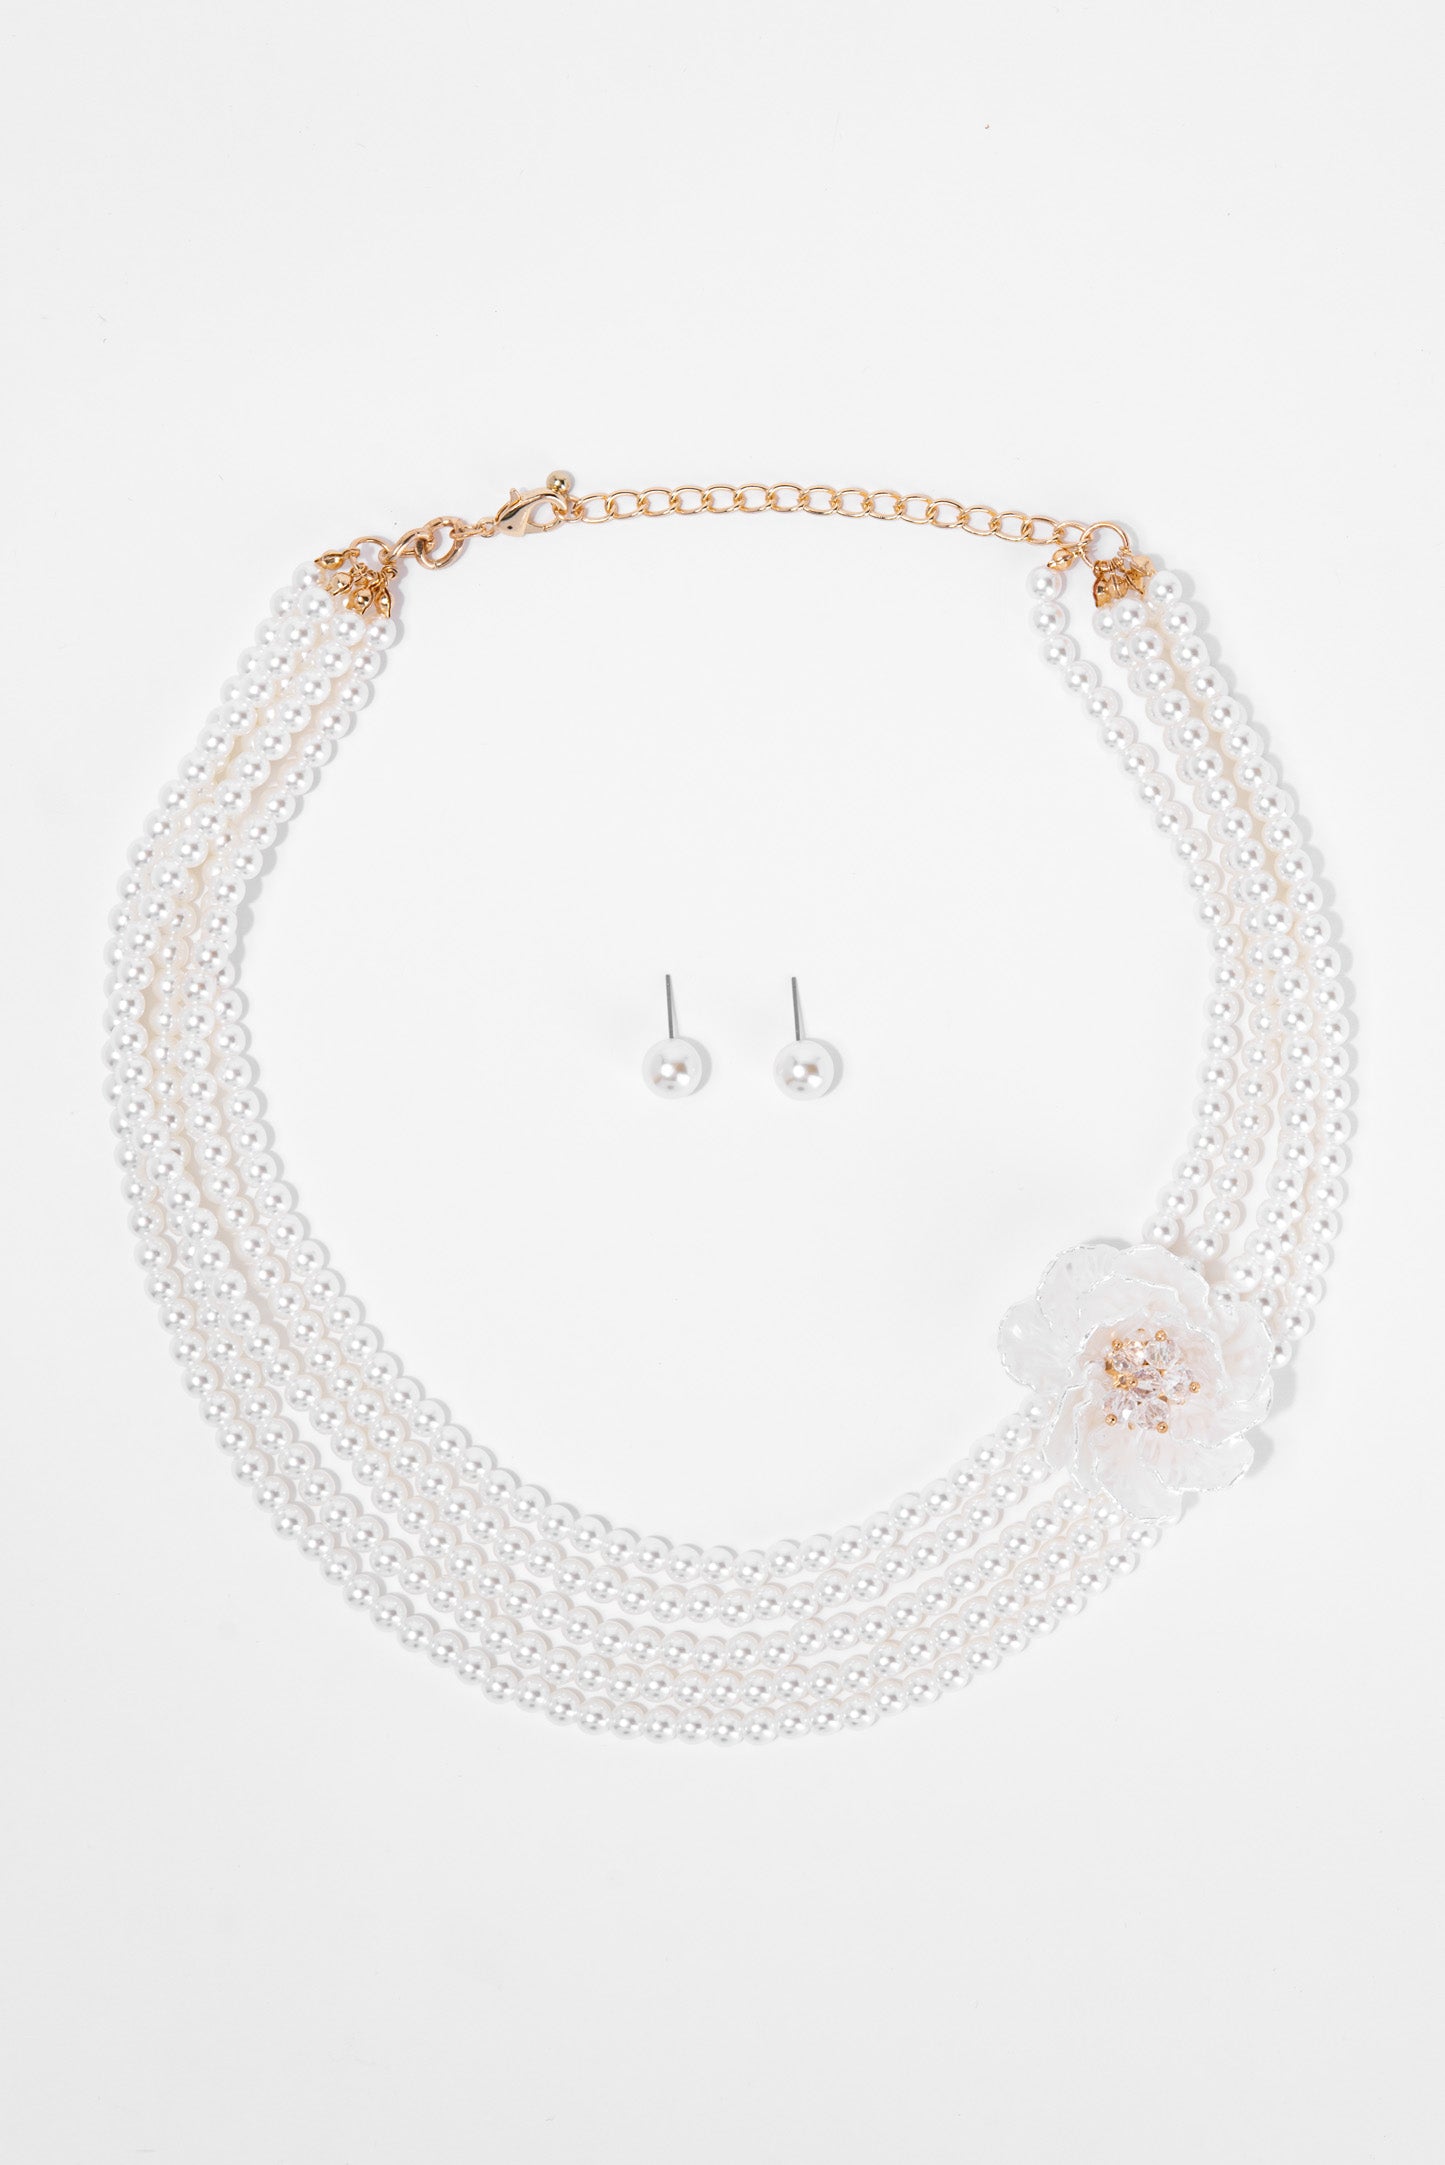 Gianna Pearl with Flower Necklace Set